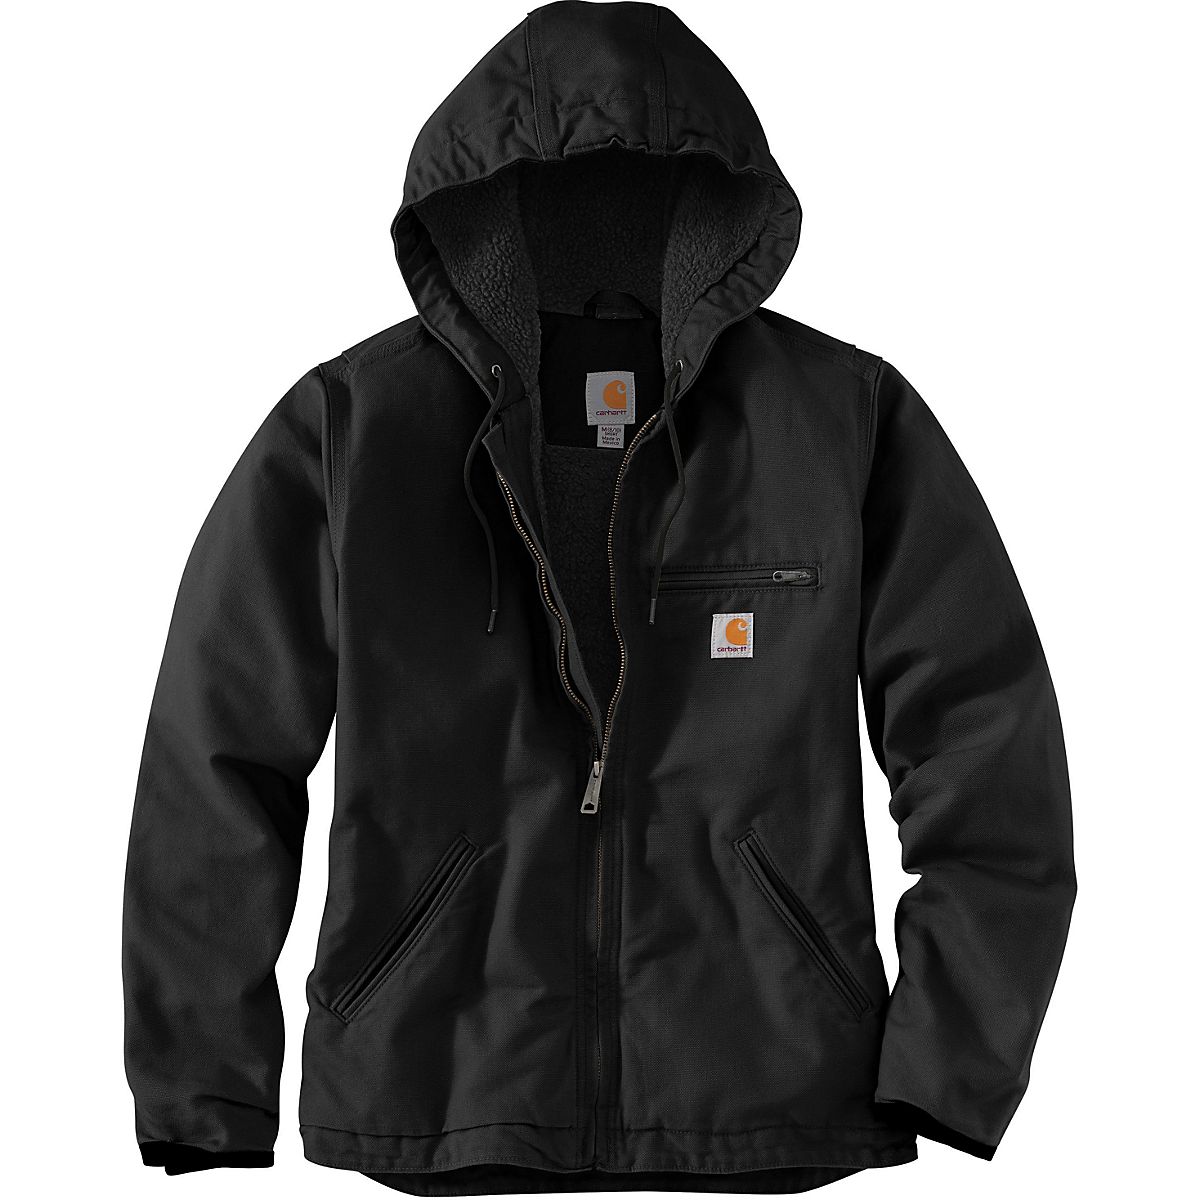 Carhartt Women's Loose Fit Washed Duck Sherpa-Lined Hooded Jacket